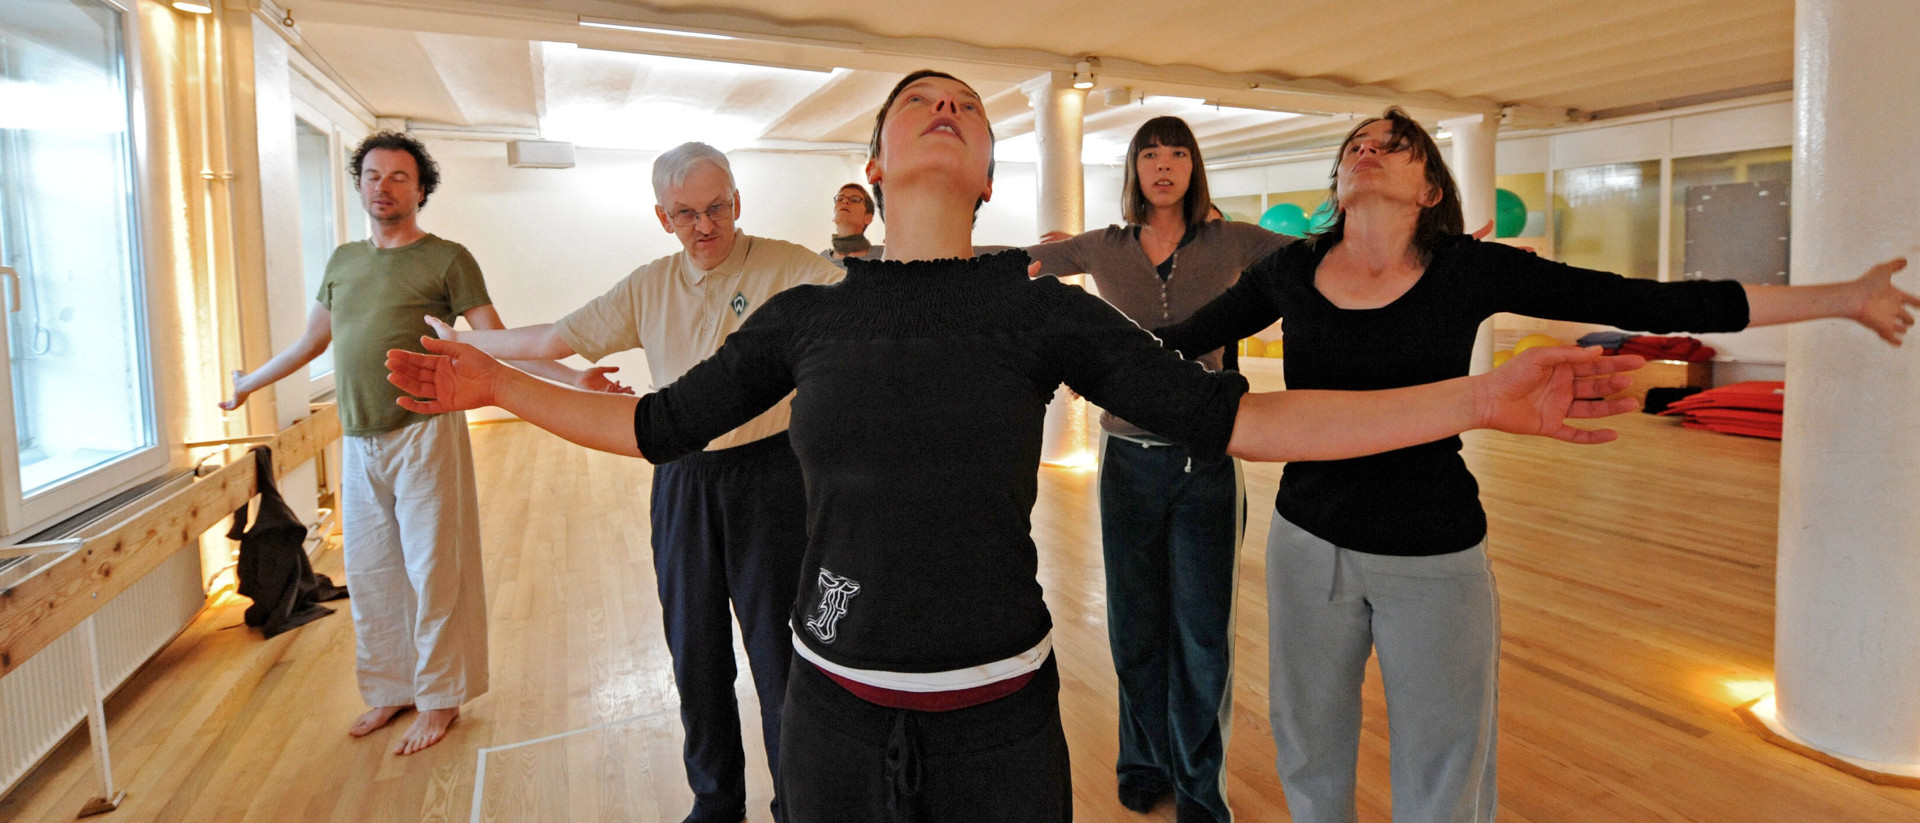 Joint practice of dance figures for people with and without disabilities